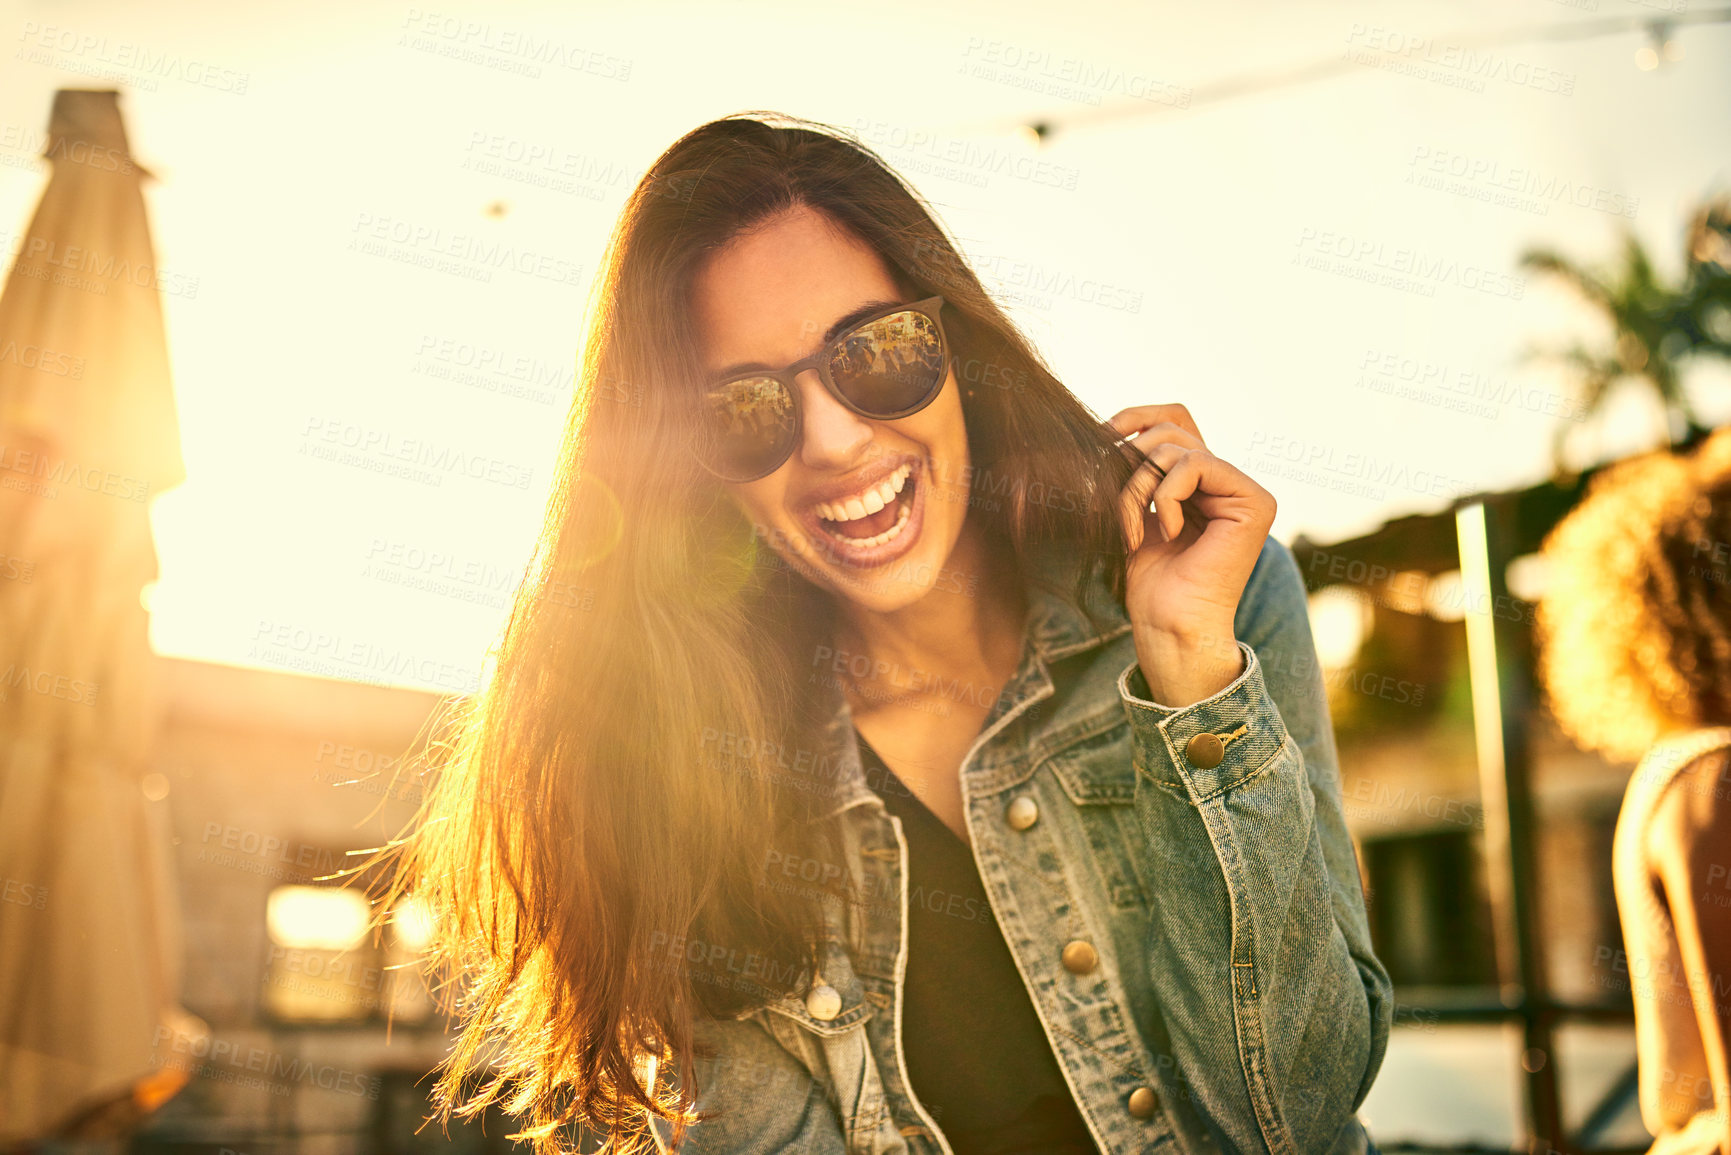 Buy stock photo Portrait of an attractive young woman spending the day outside on a rooftop